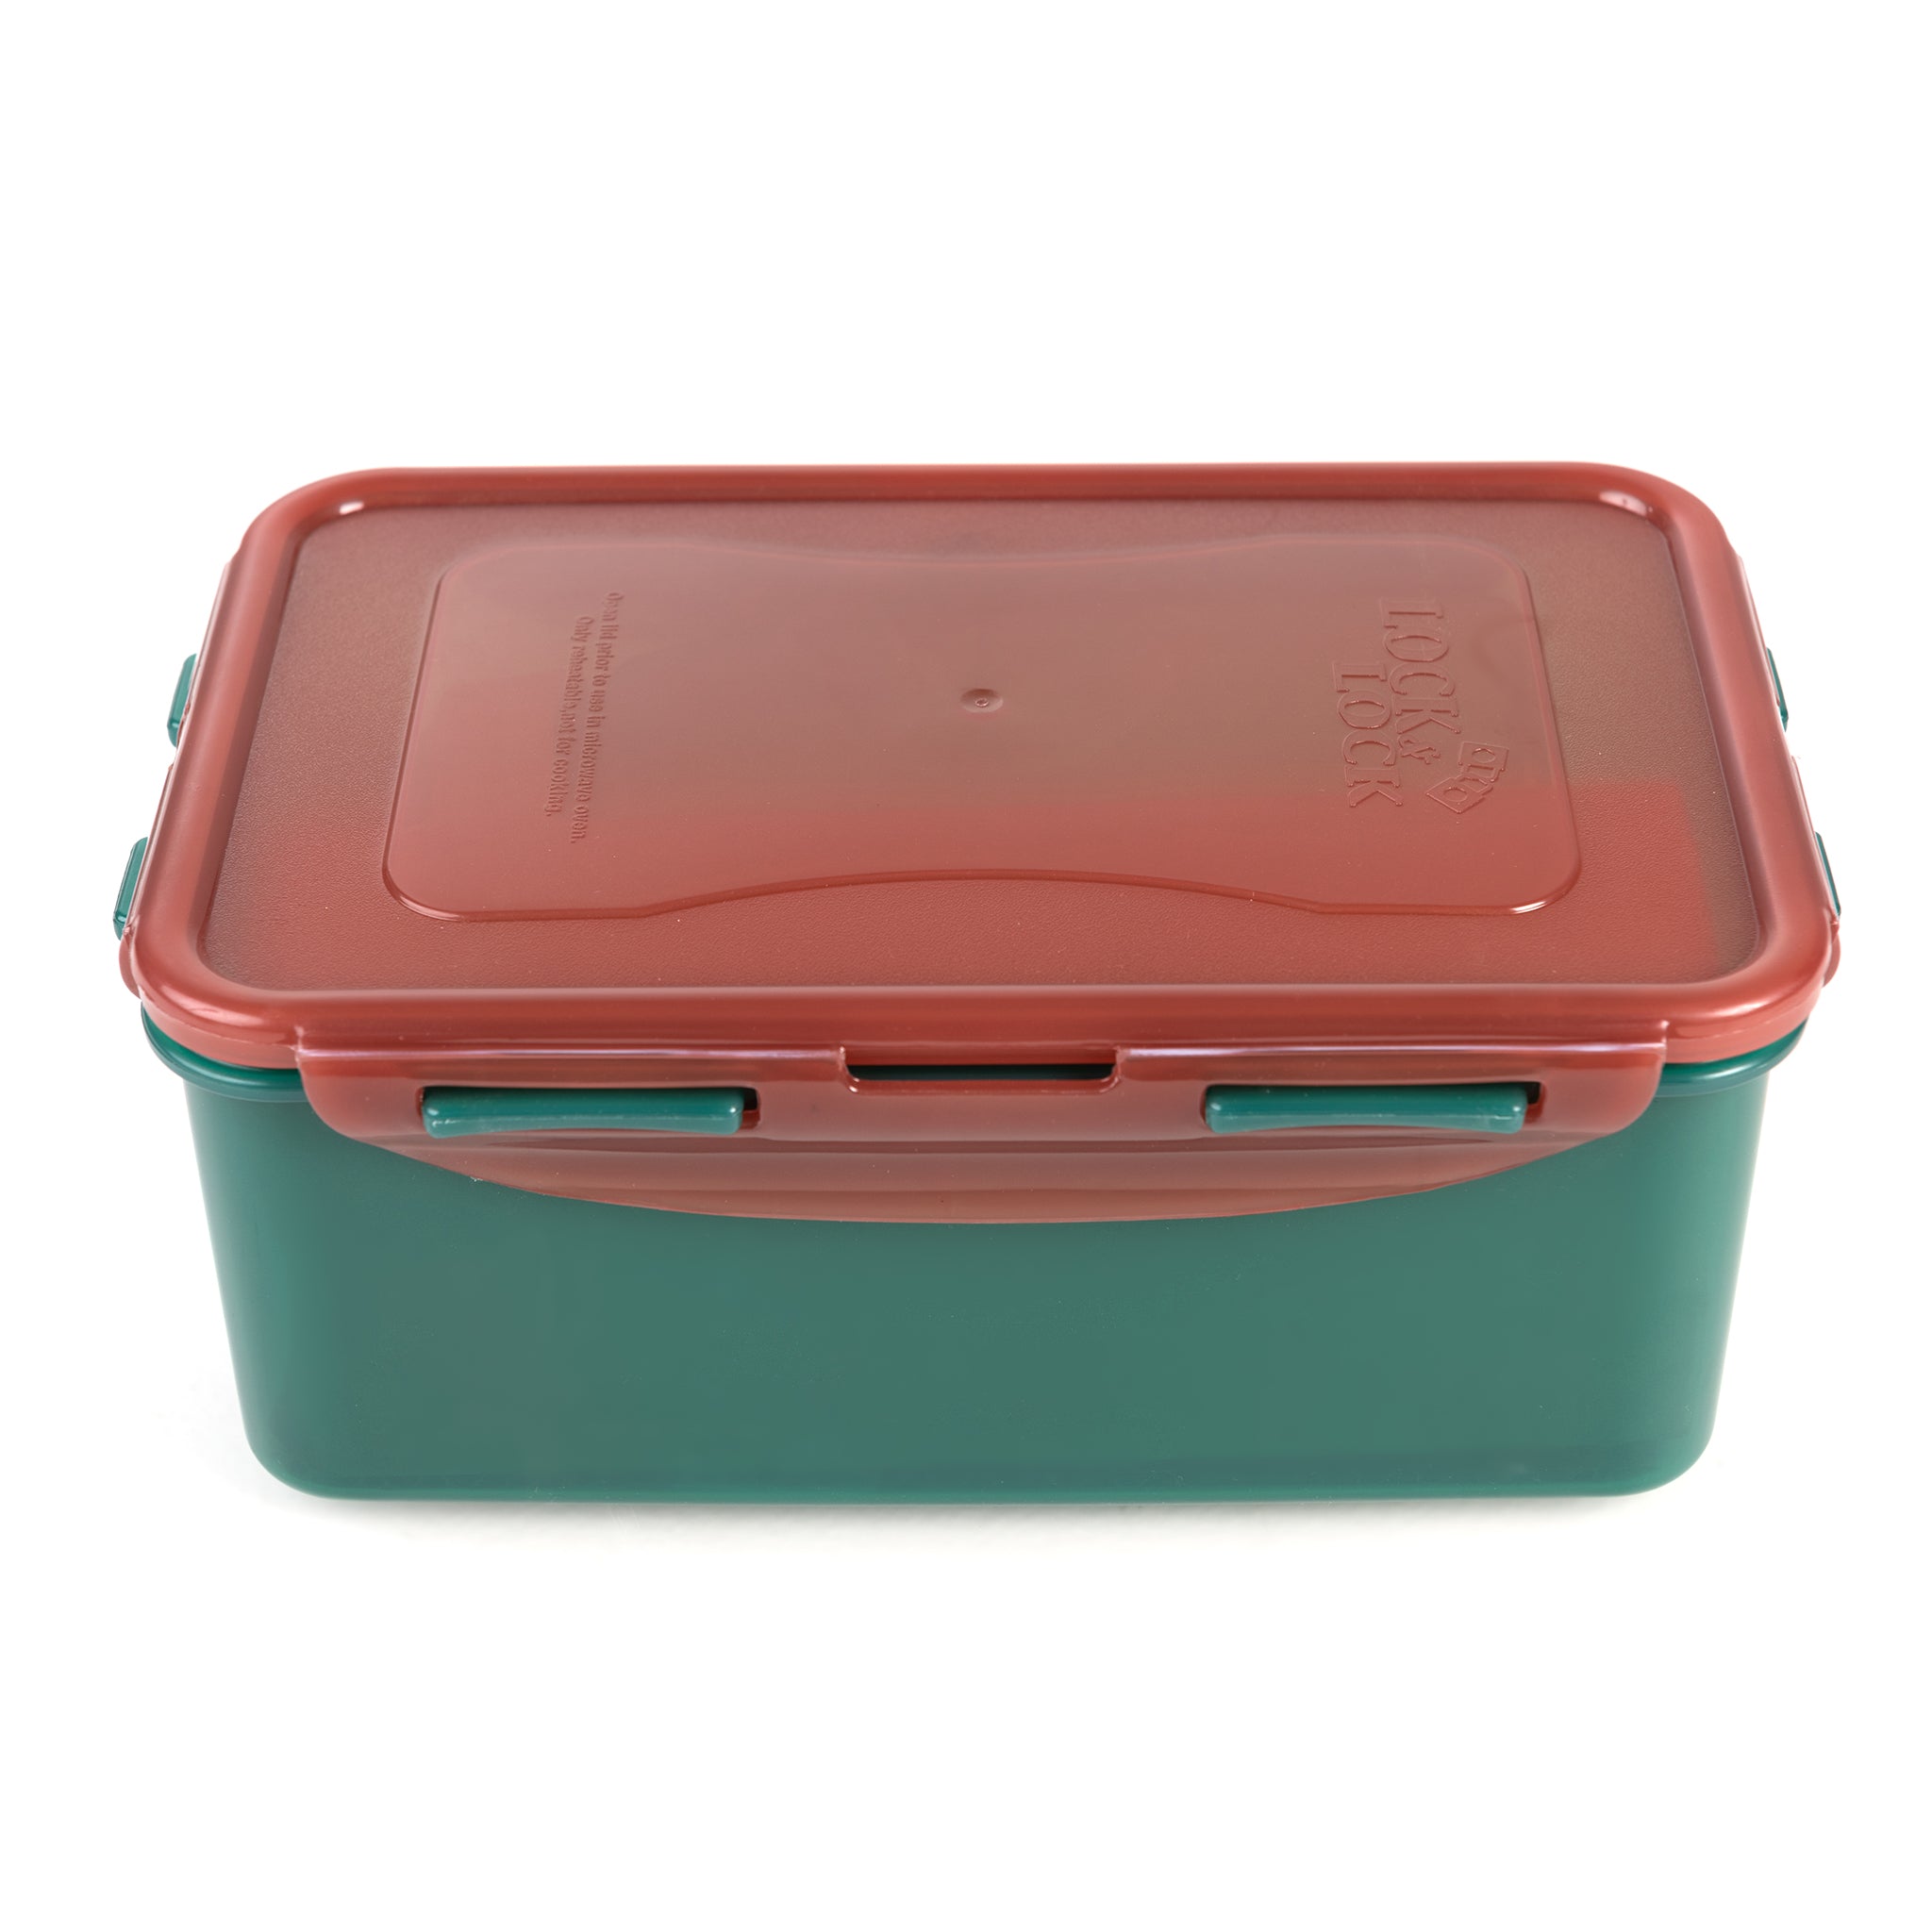 recycled plastic lunch box with hidden 500ml water bottle inside